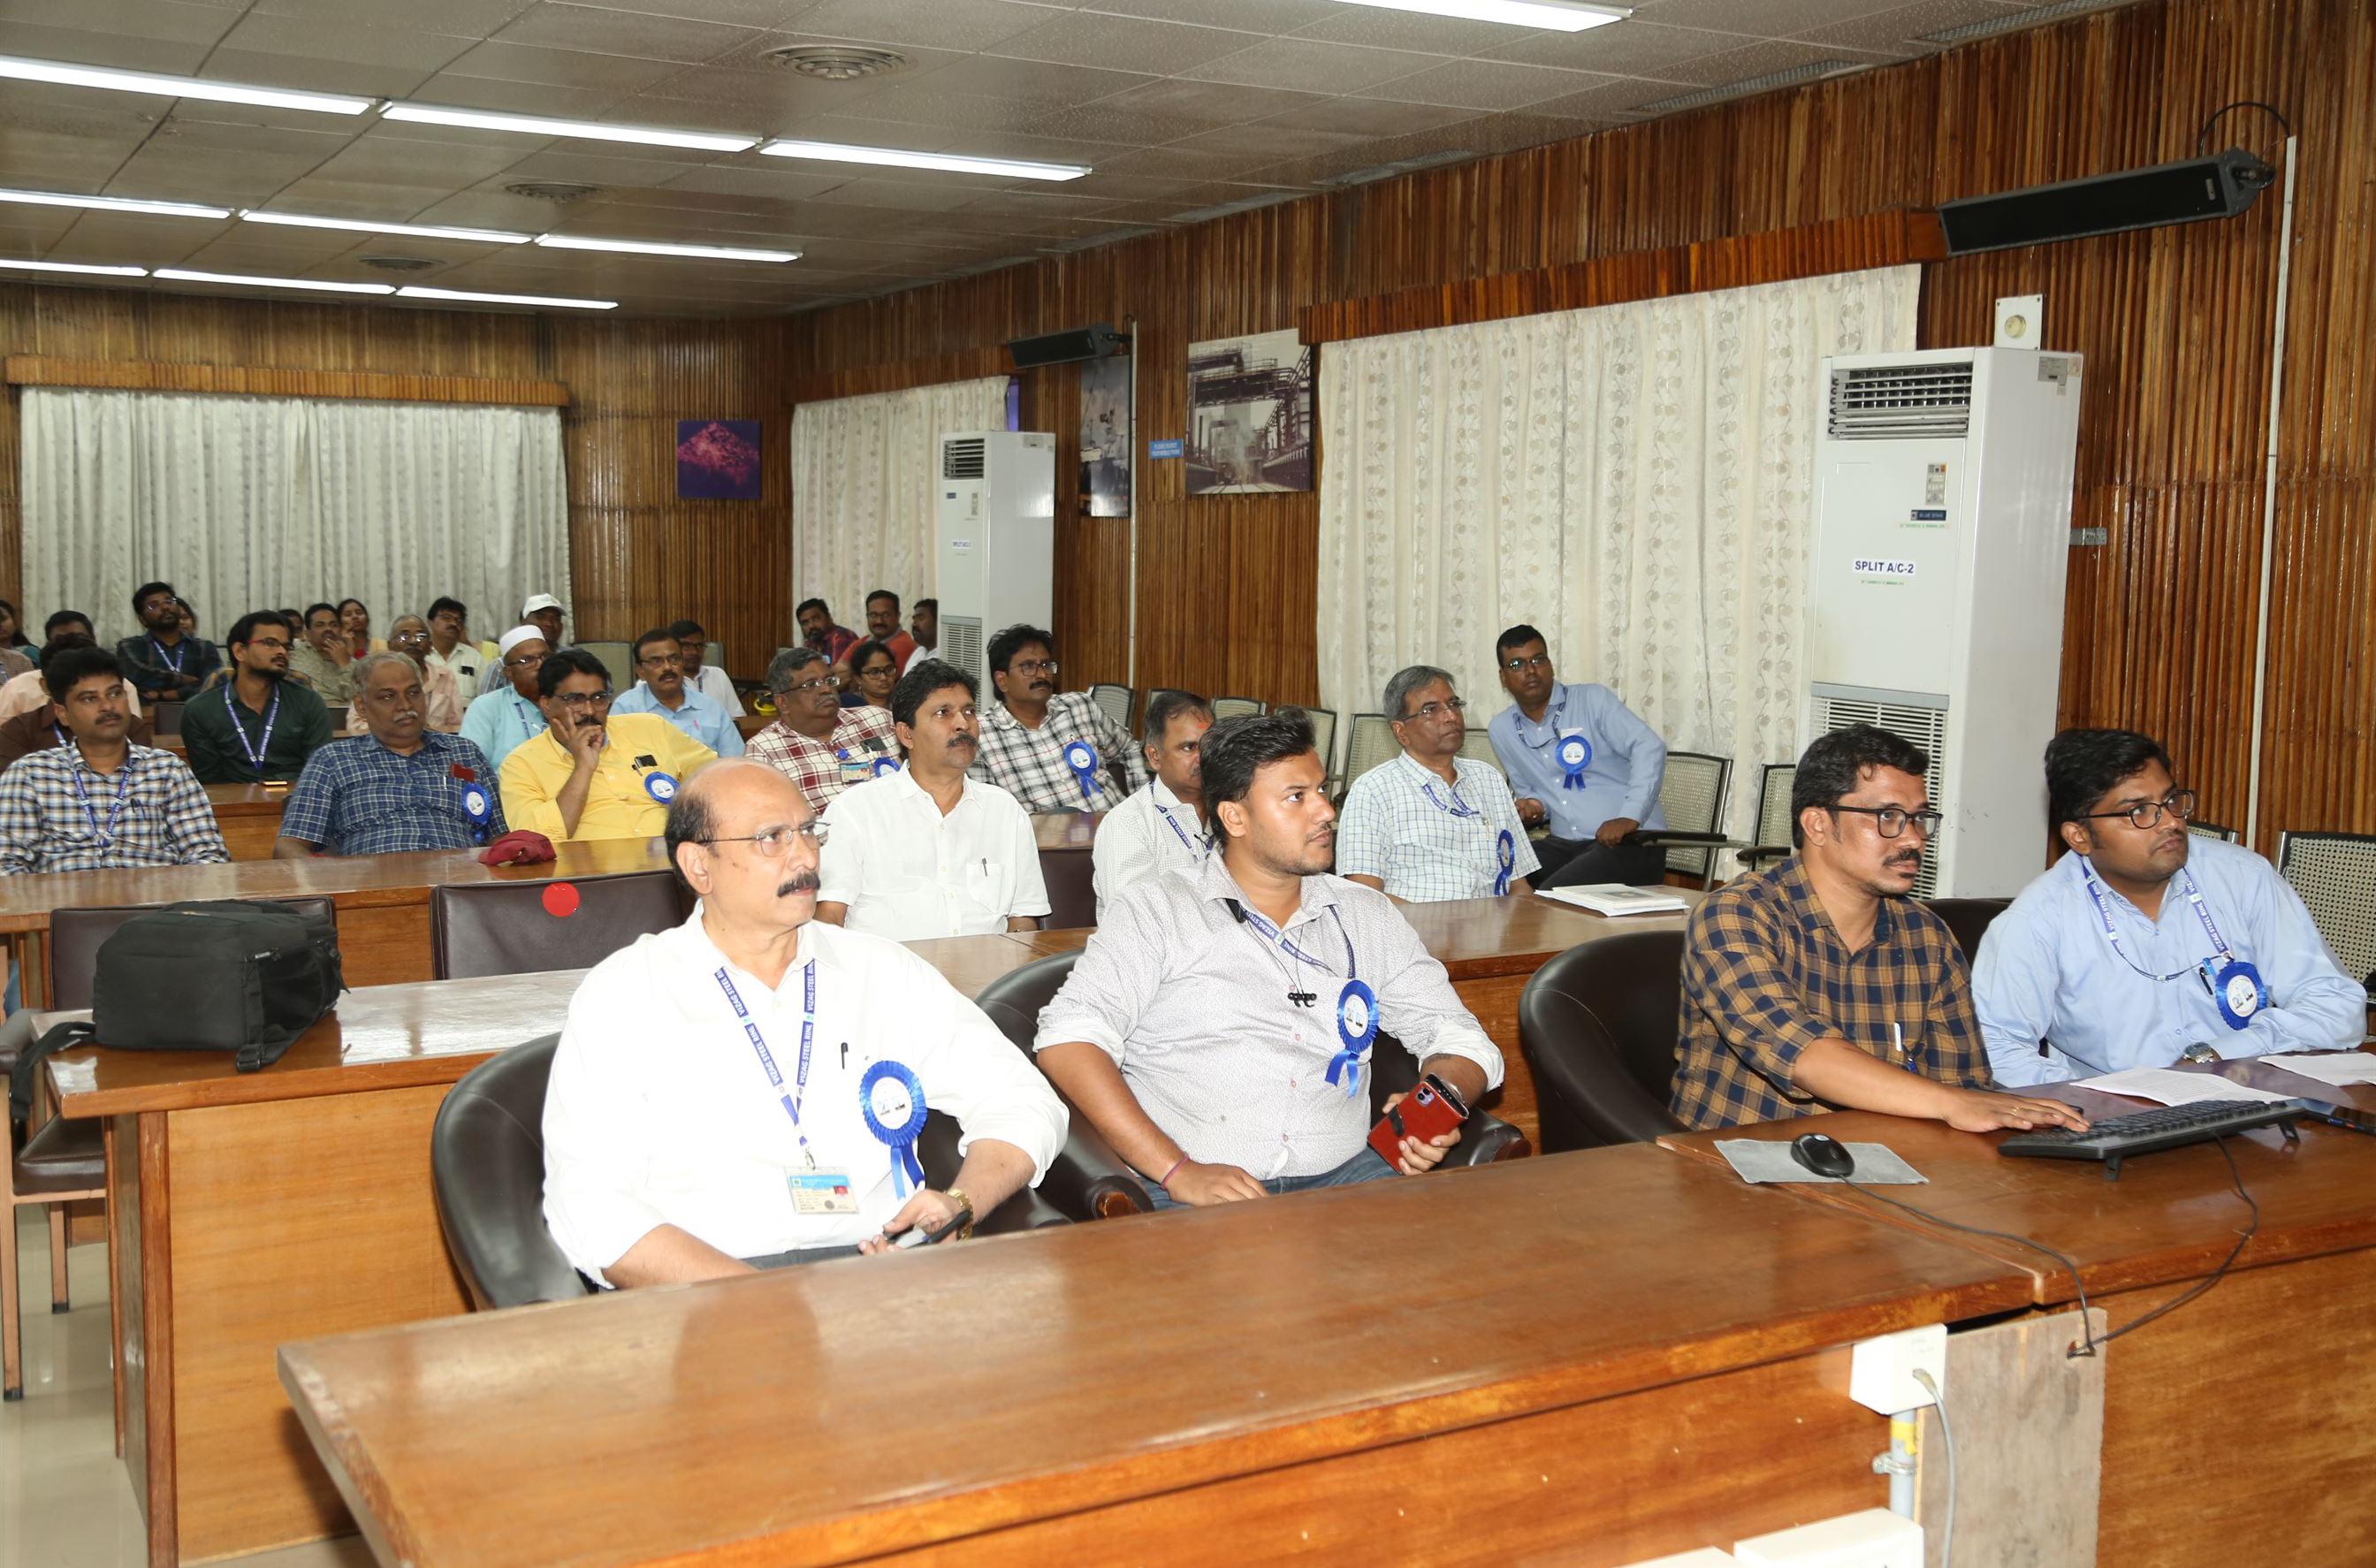 World Water Day celebrated at RINL   